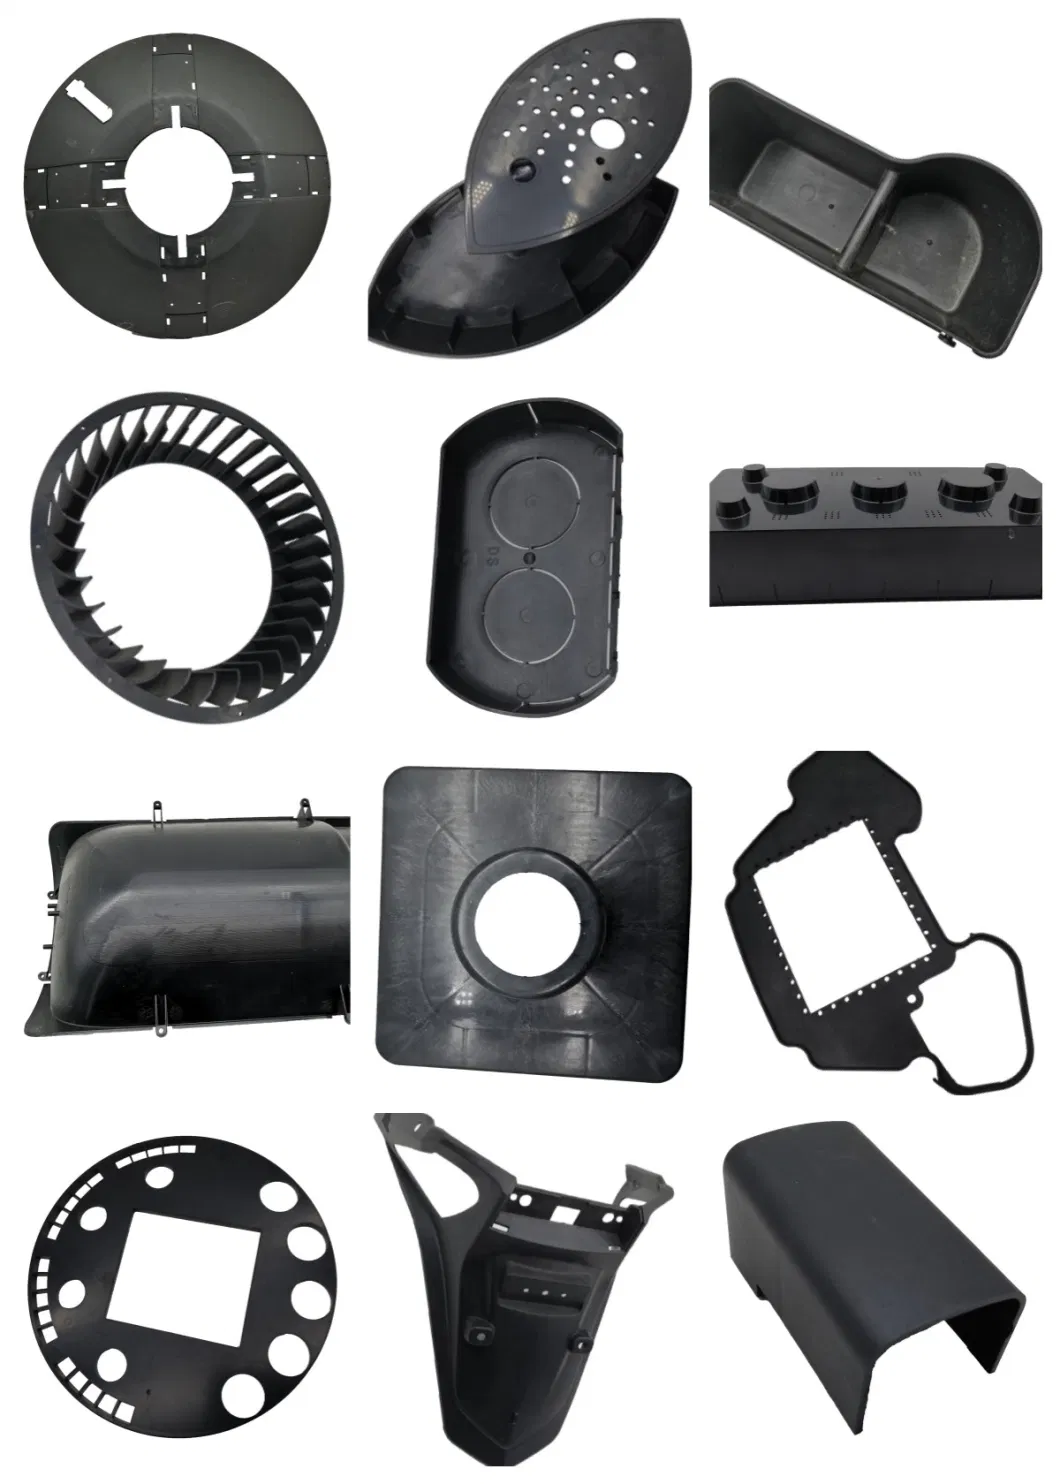 Precision Plasticinjection Mould Molding Custom Injection Molding Component